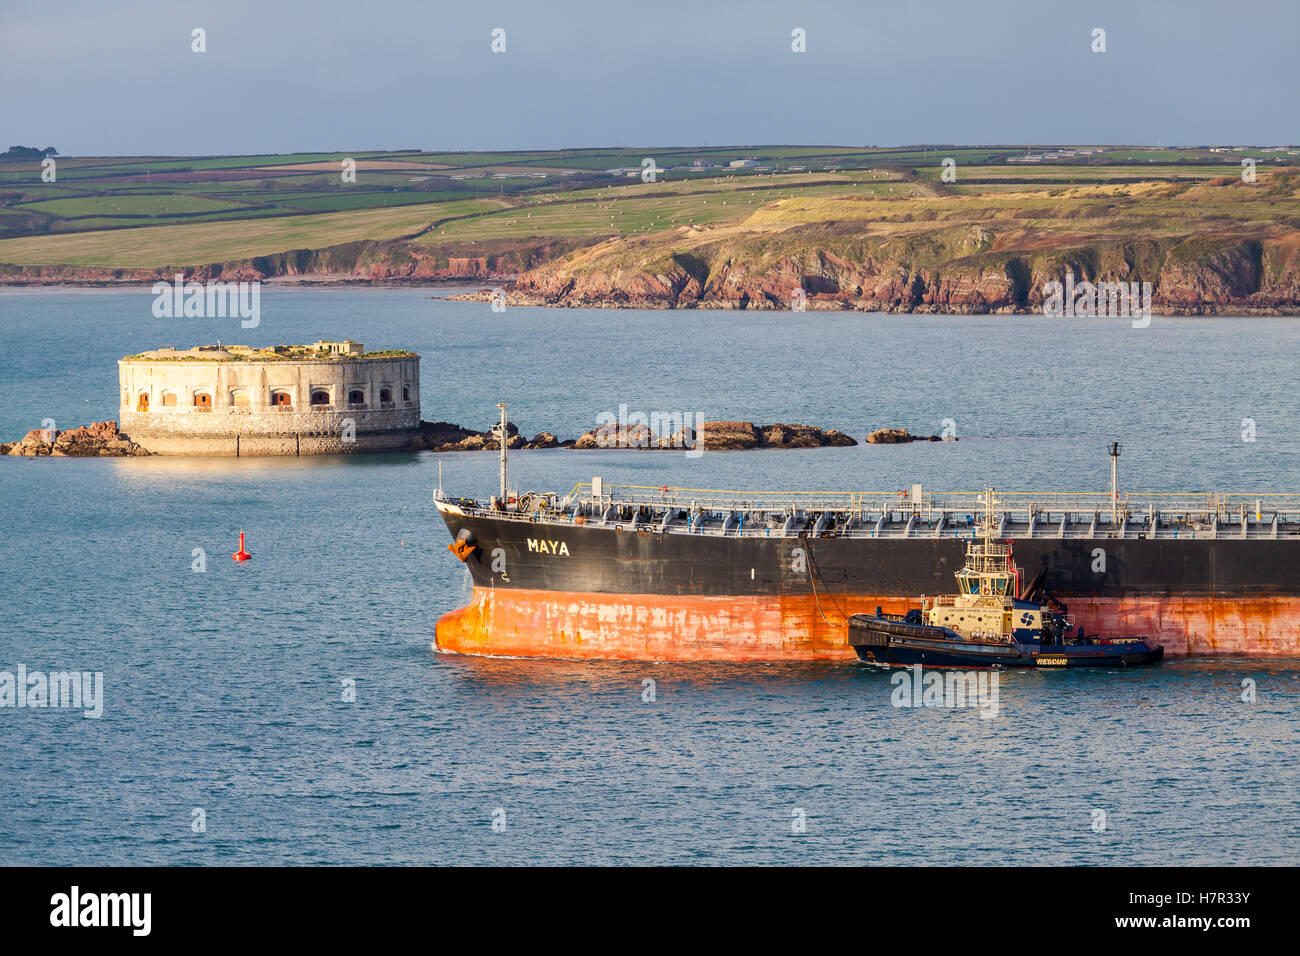 The Maya Oil Tanker in Milford Haven, Pembrokeshire Stock Photo